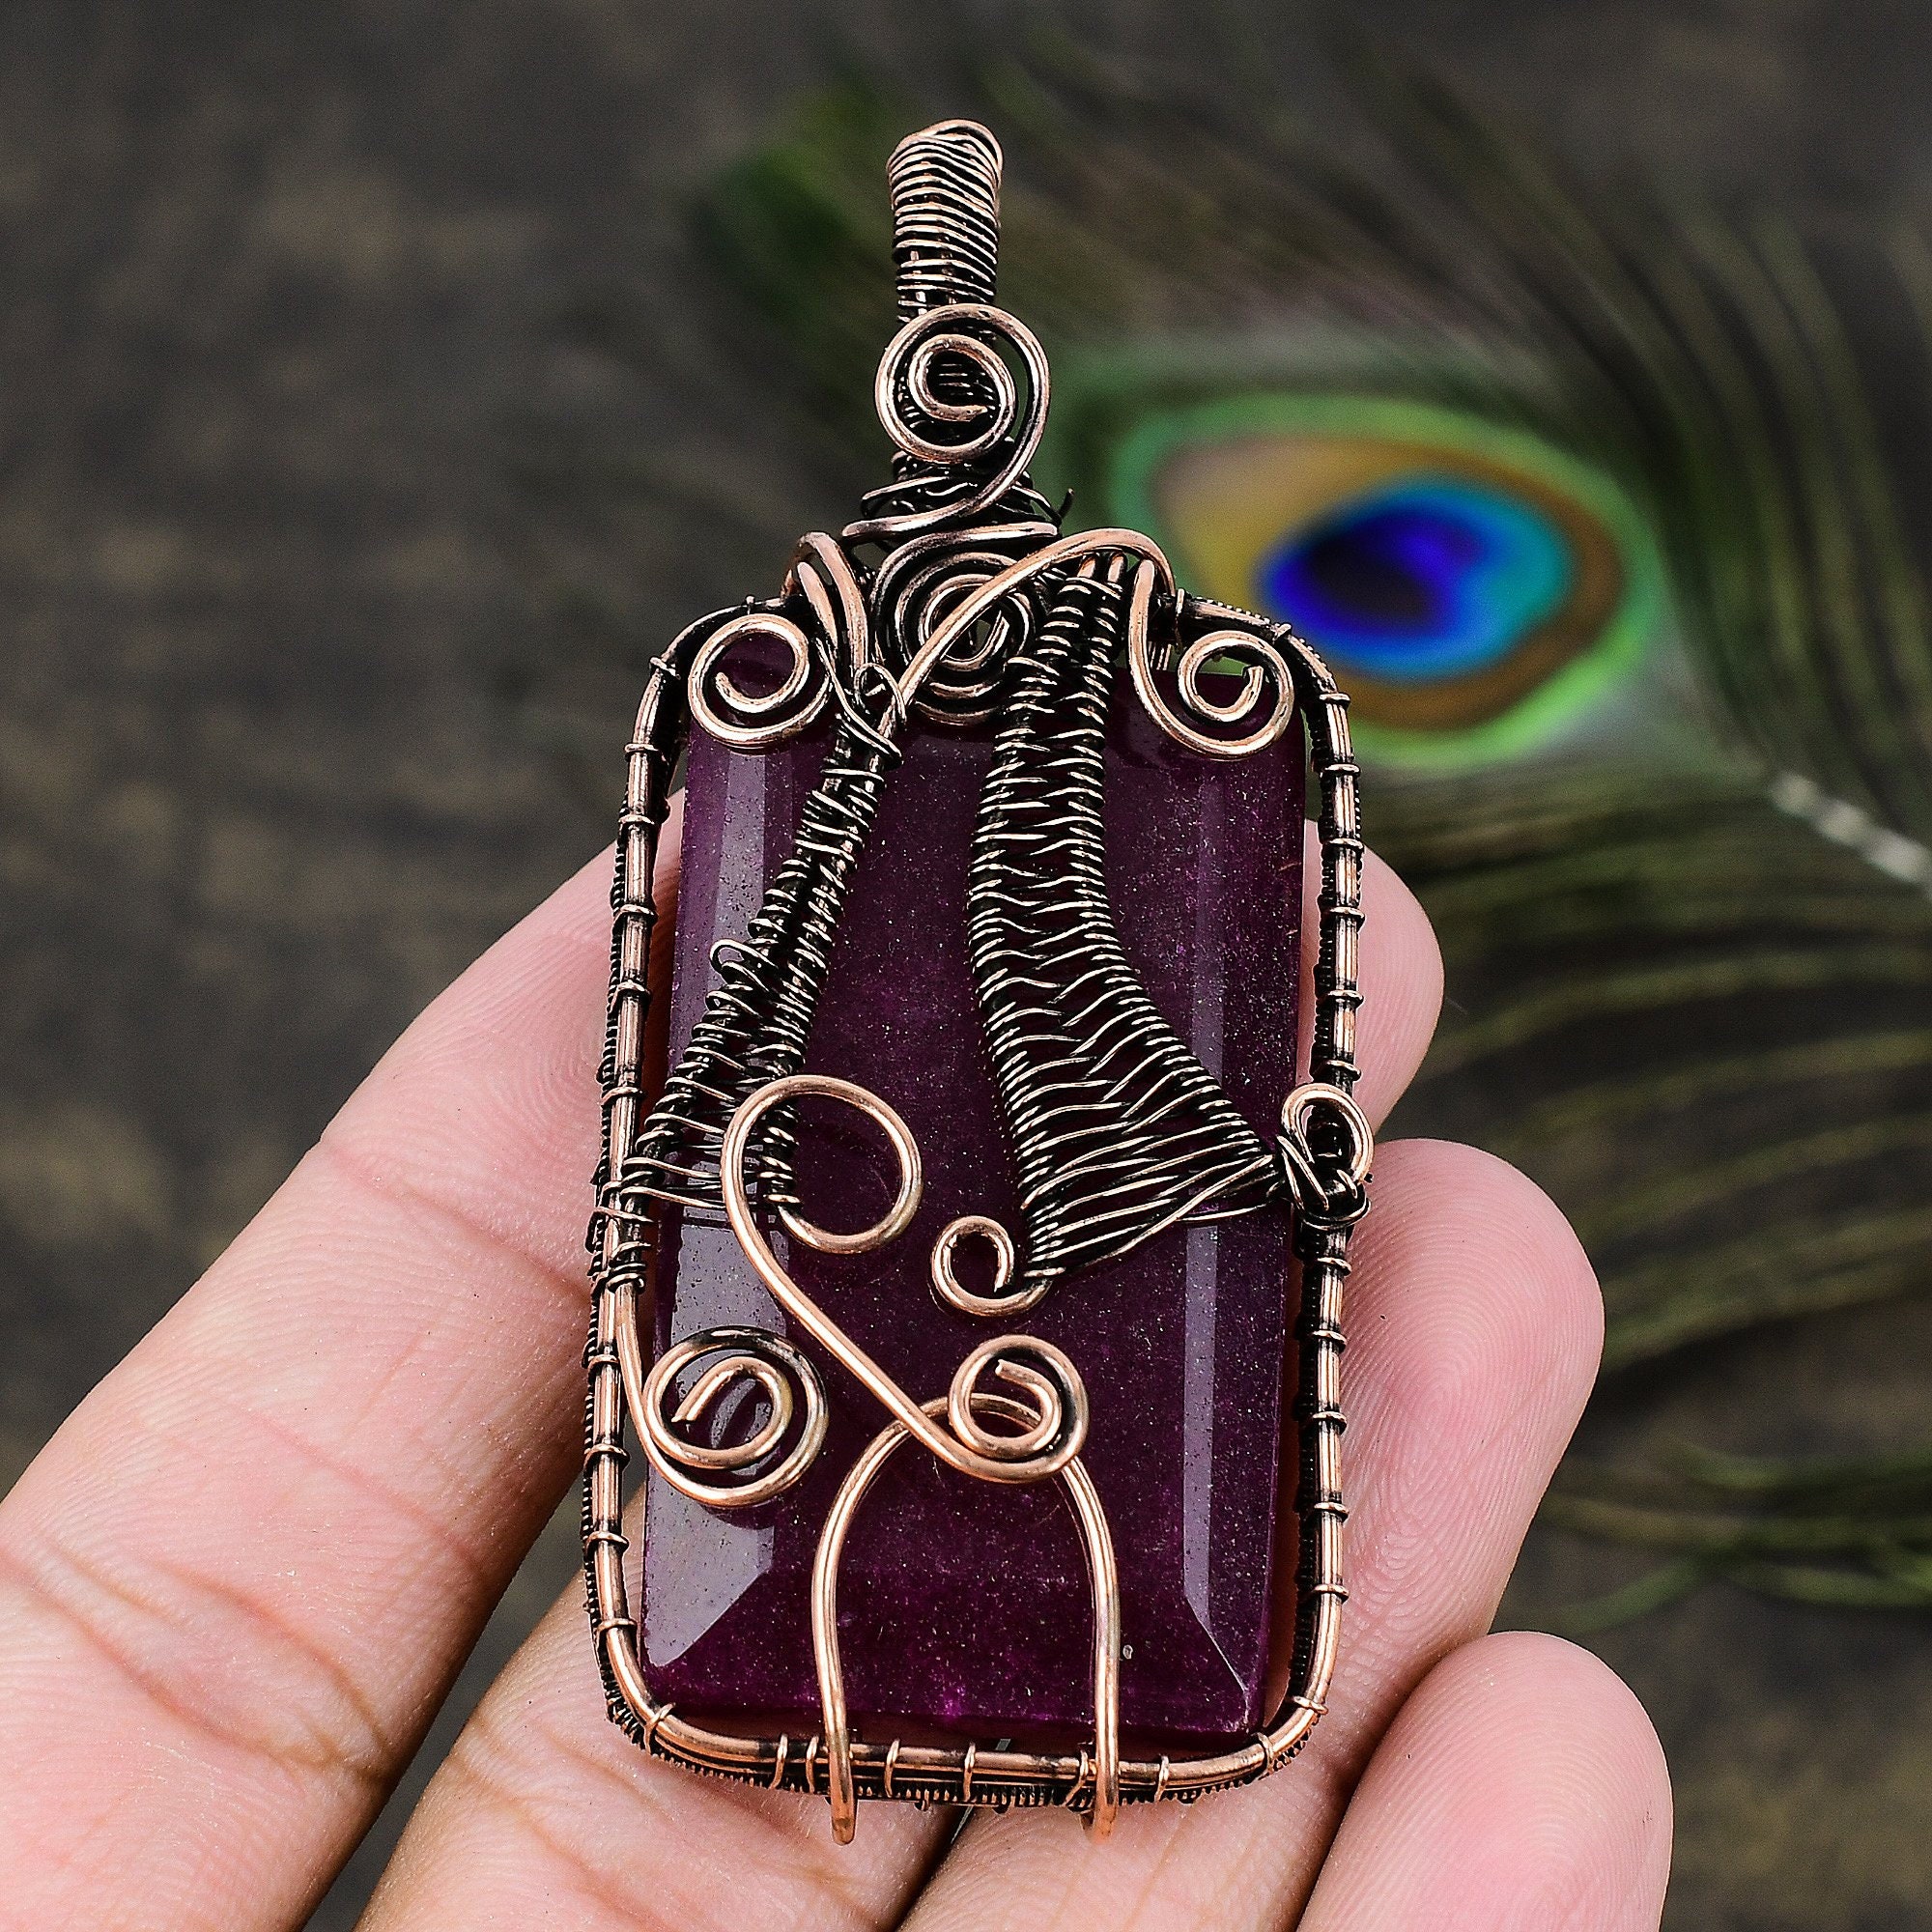 Kashmir Red Ruby Pendant Copper Wire Wrapped Gemstone Pendant